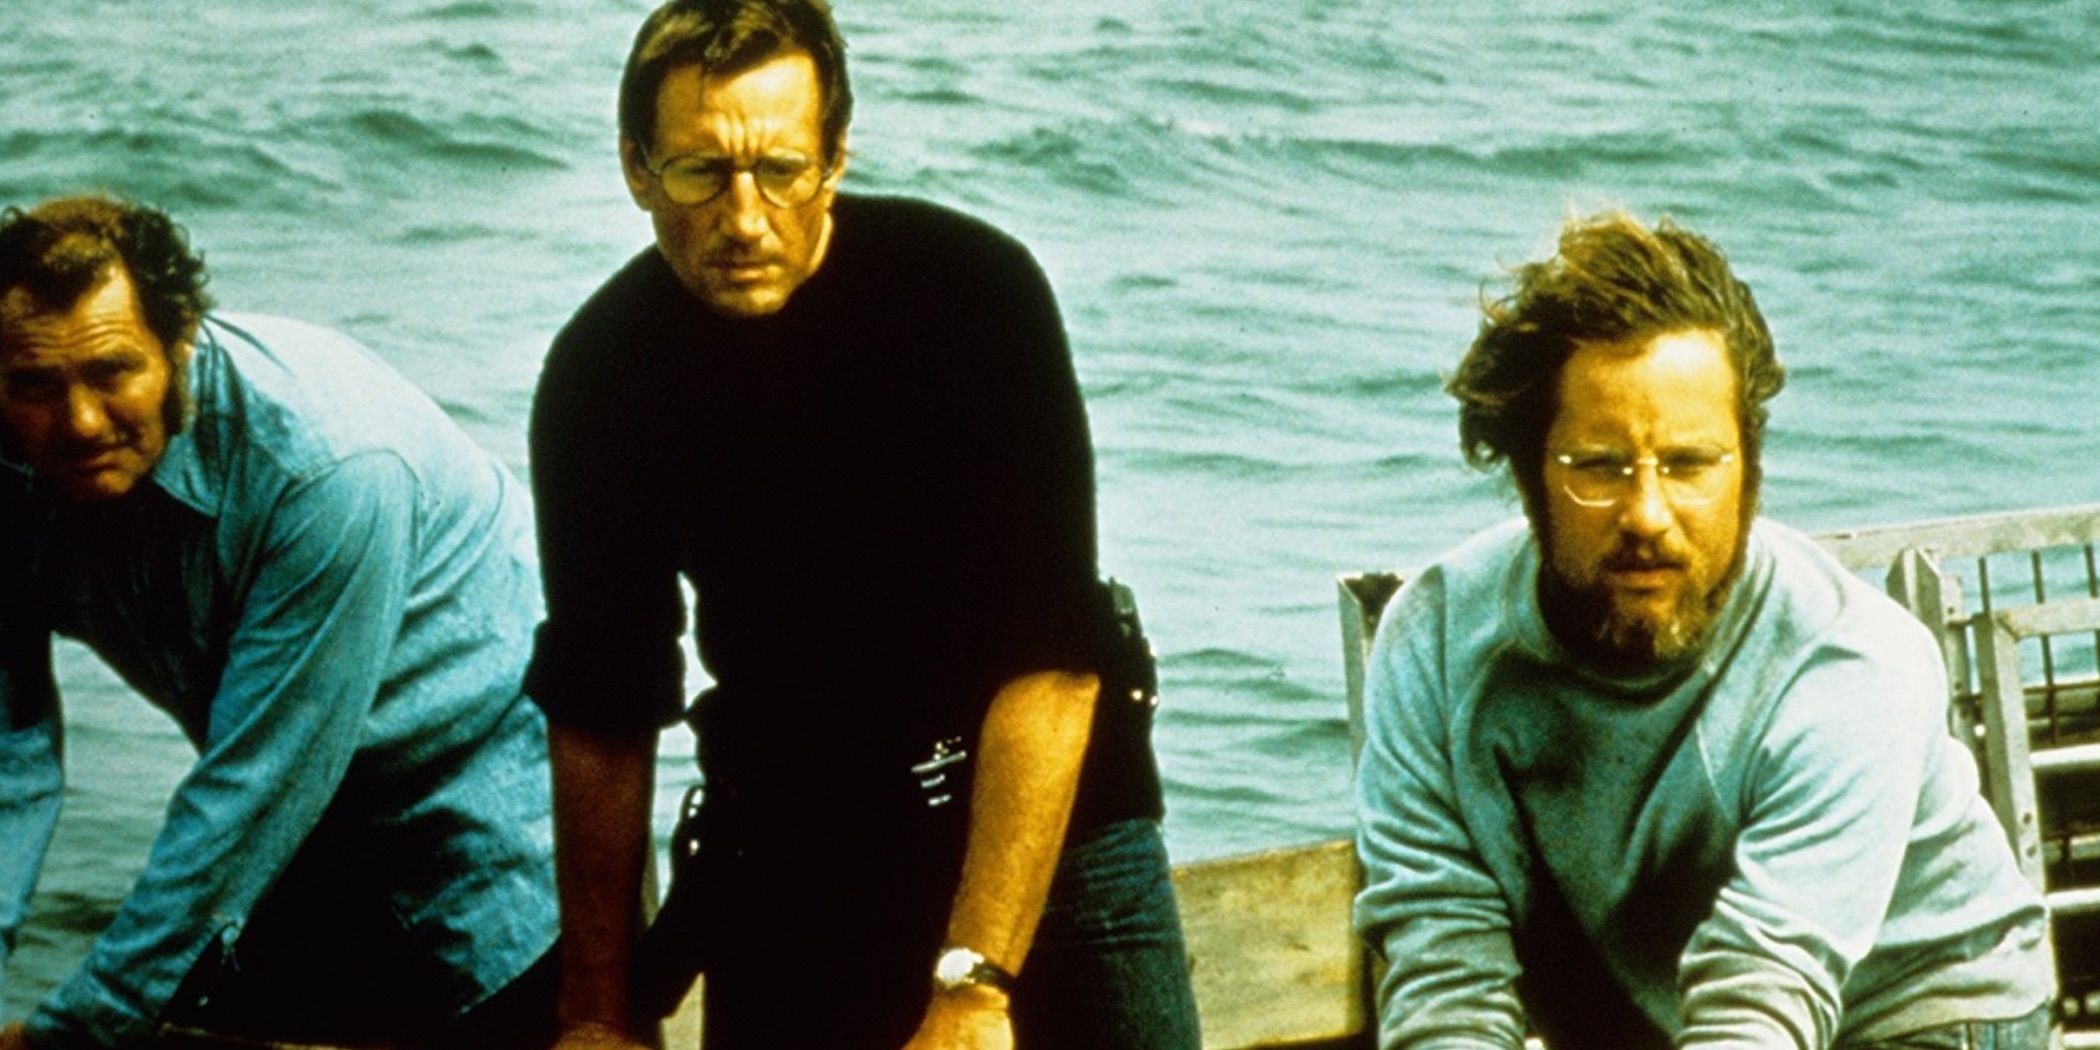 Three men look on as the sea rages behind them in Jaws.